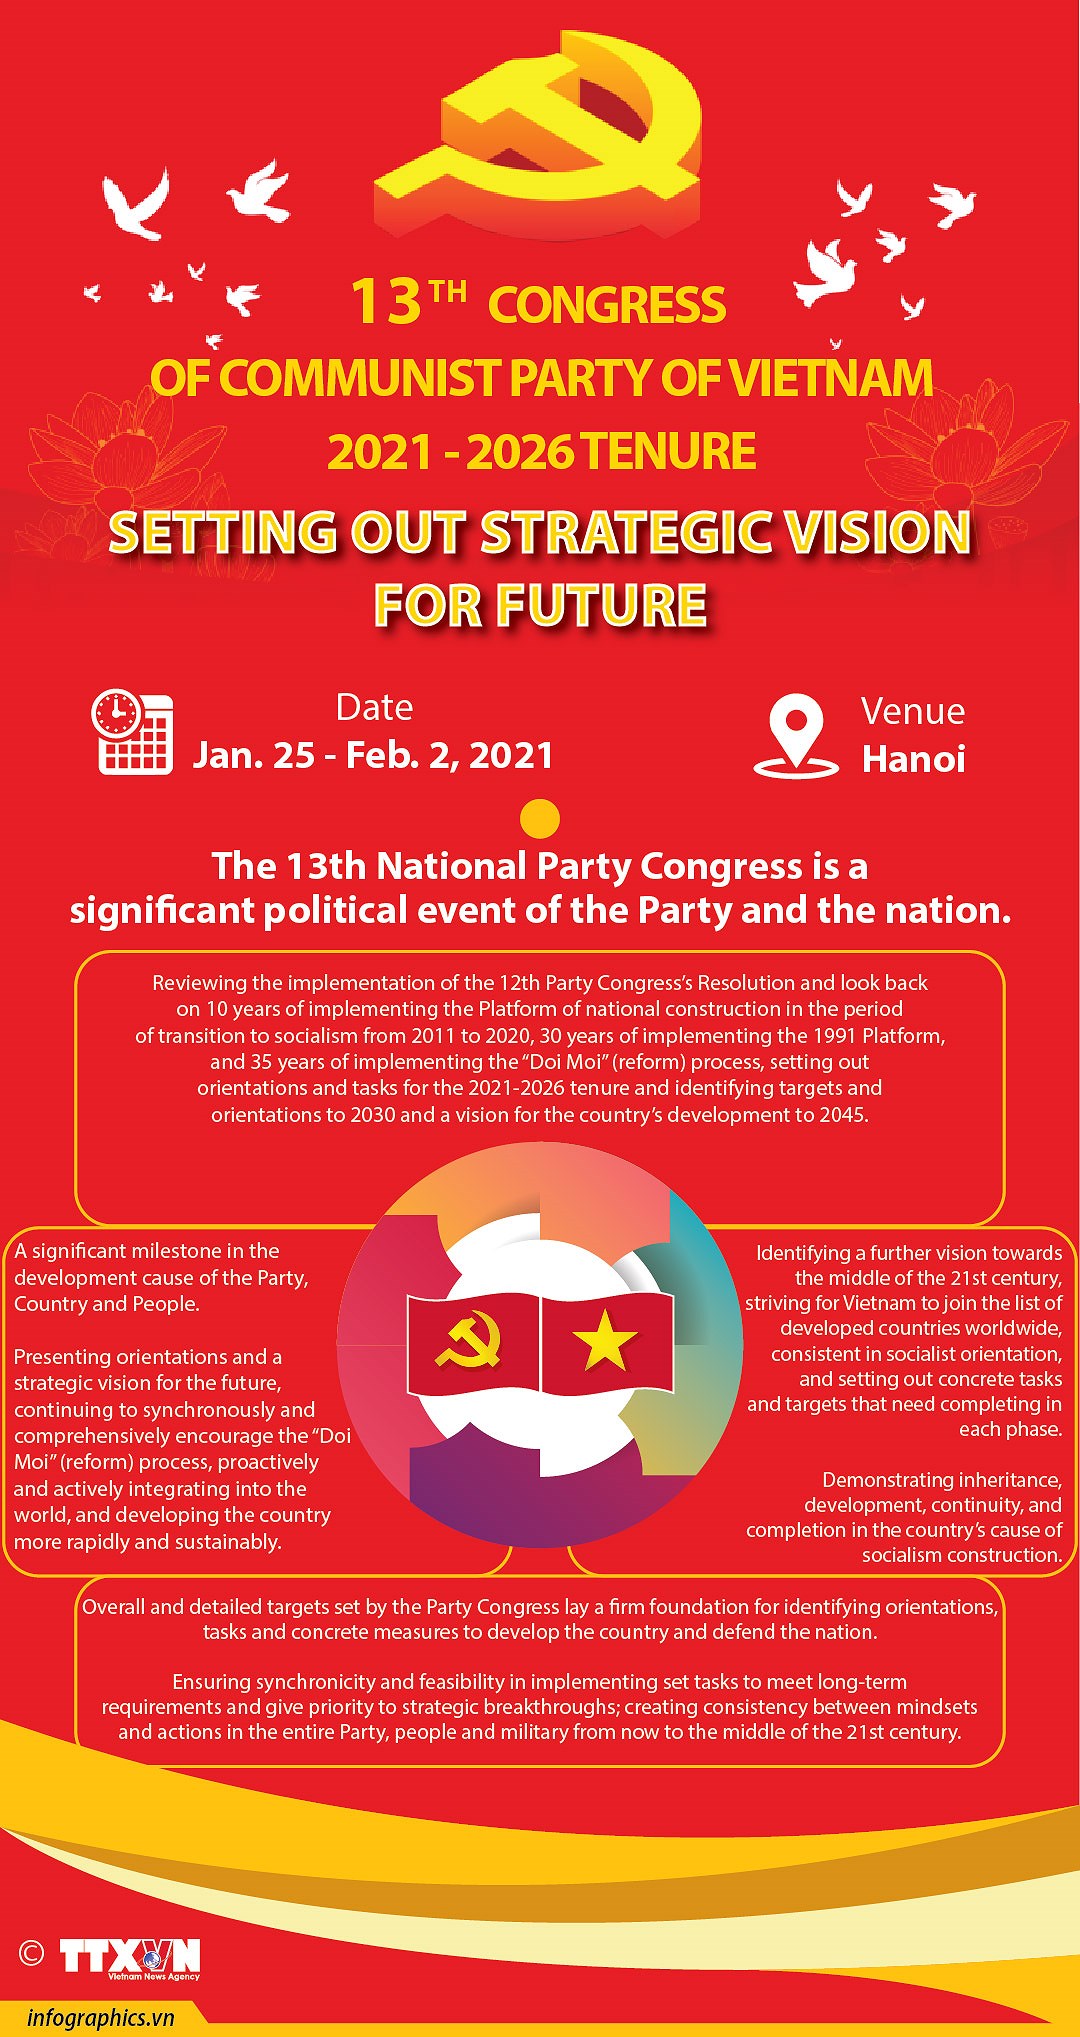 13th Party Congress sets out strategic vision for future hinh anh 1